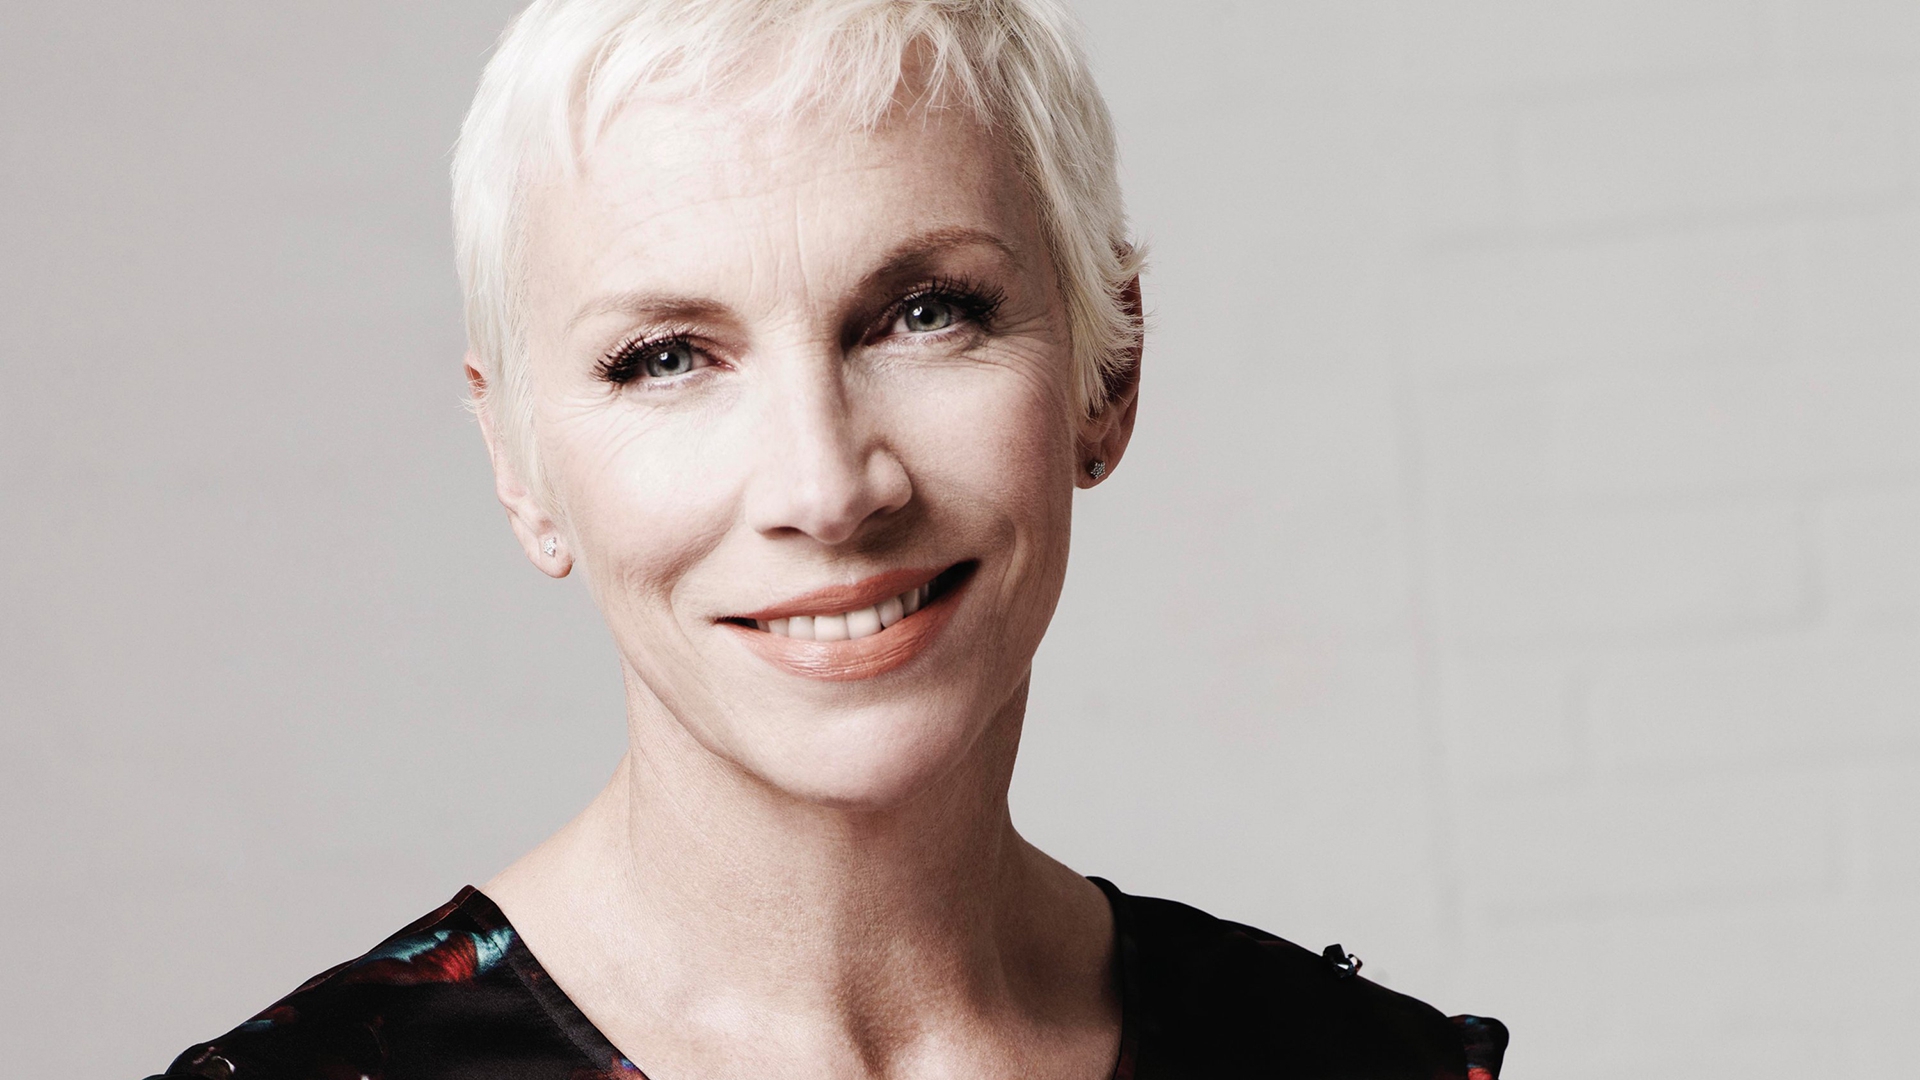 Download free Wallpapers of Annie Lennox in high resolution and high qualit...